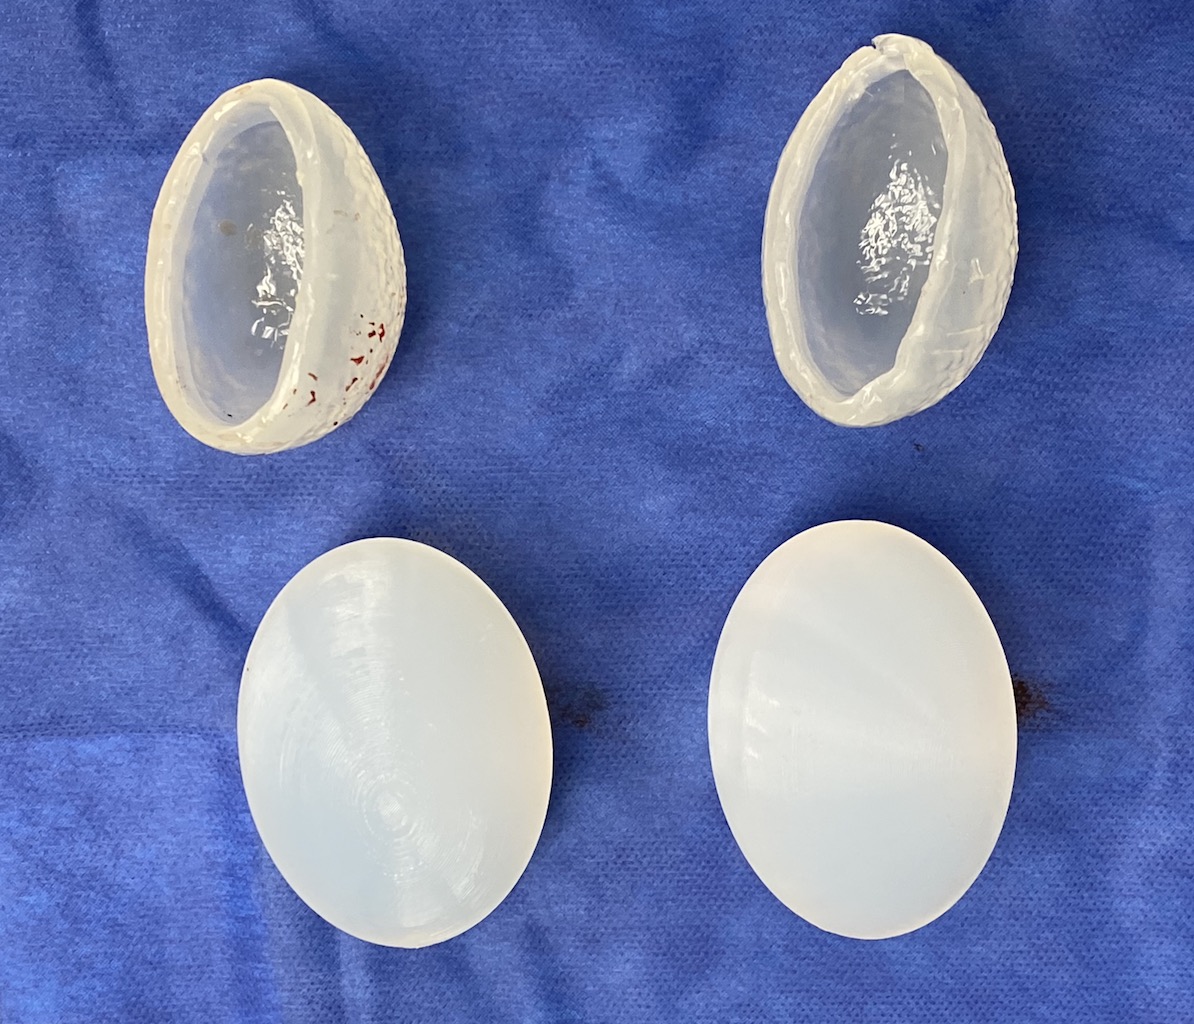 Solid Xl Testicle Implan Replacements Vs Cupped Testicle Implants Dr Barry Eppley Indianapolis